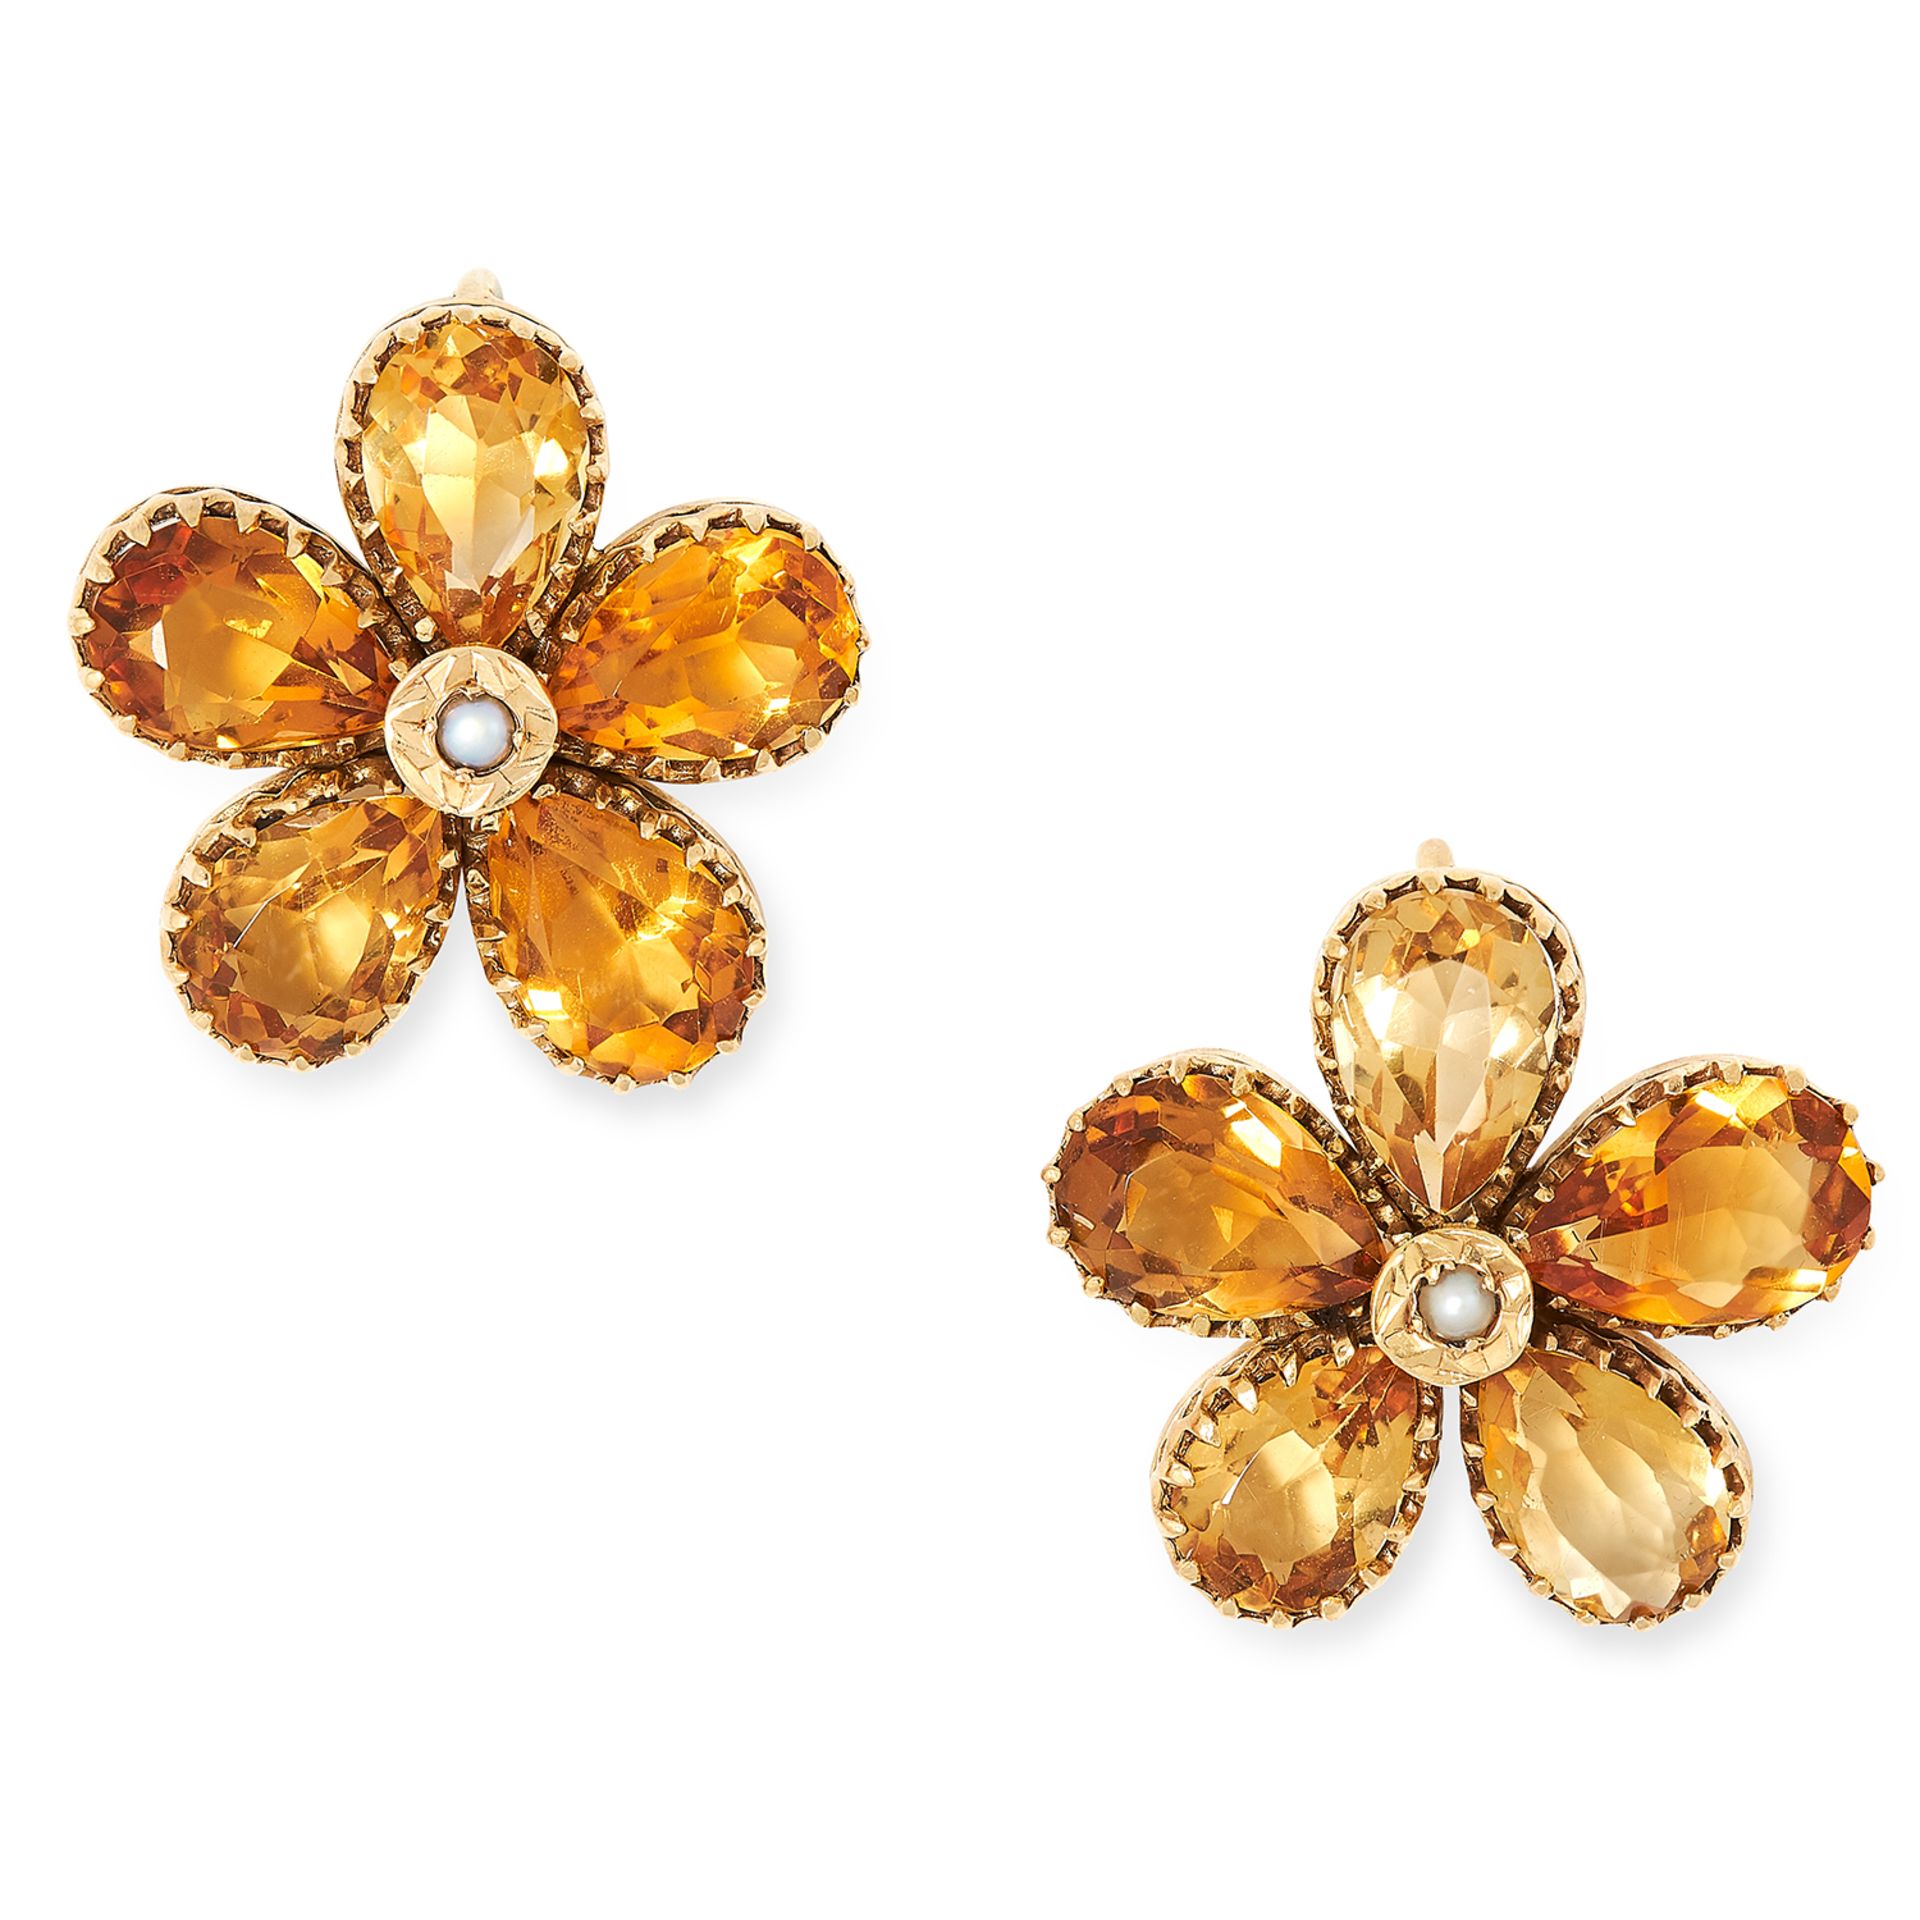 CITRINE AND PEARL FLOWER EARRINGS each set with a pearl in a border of pear cut citrine, 2cm, 6g.